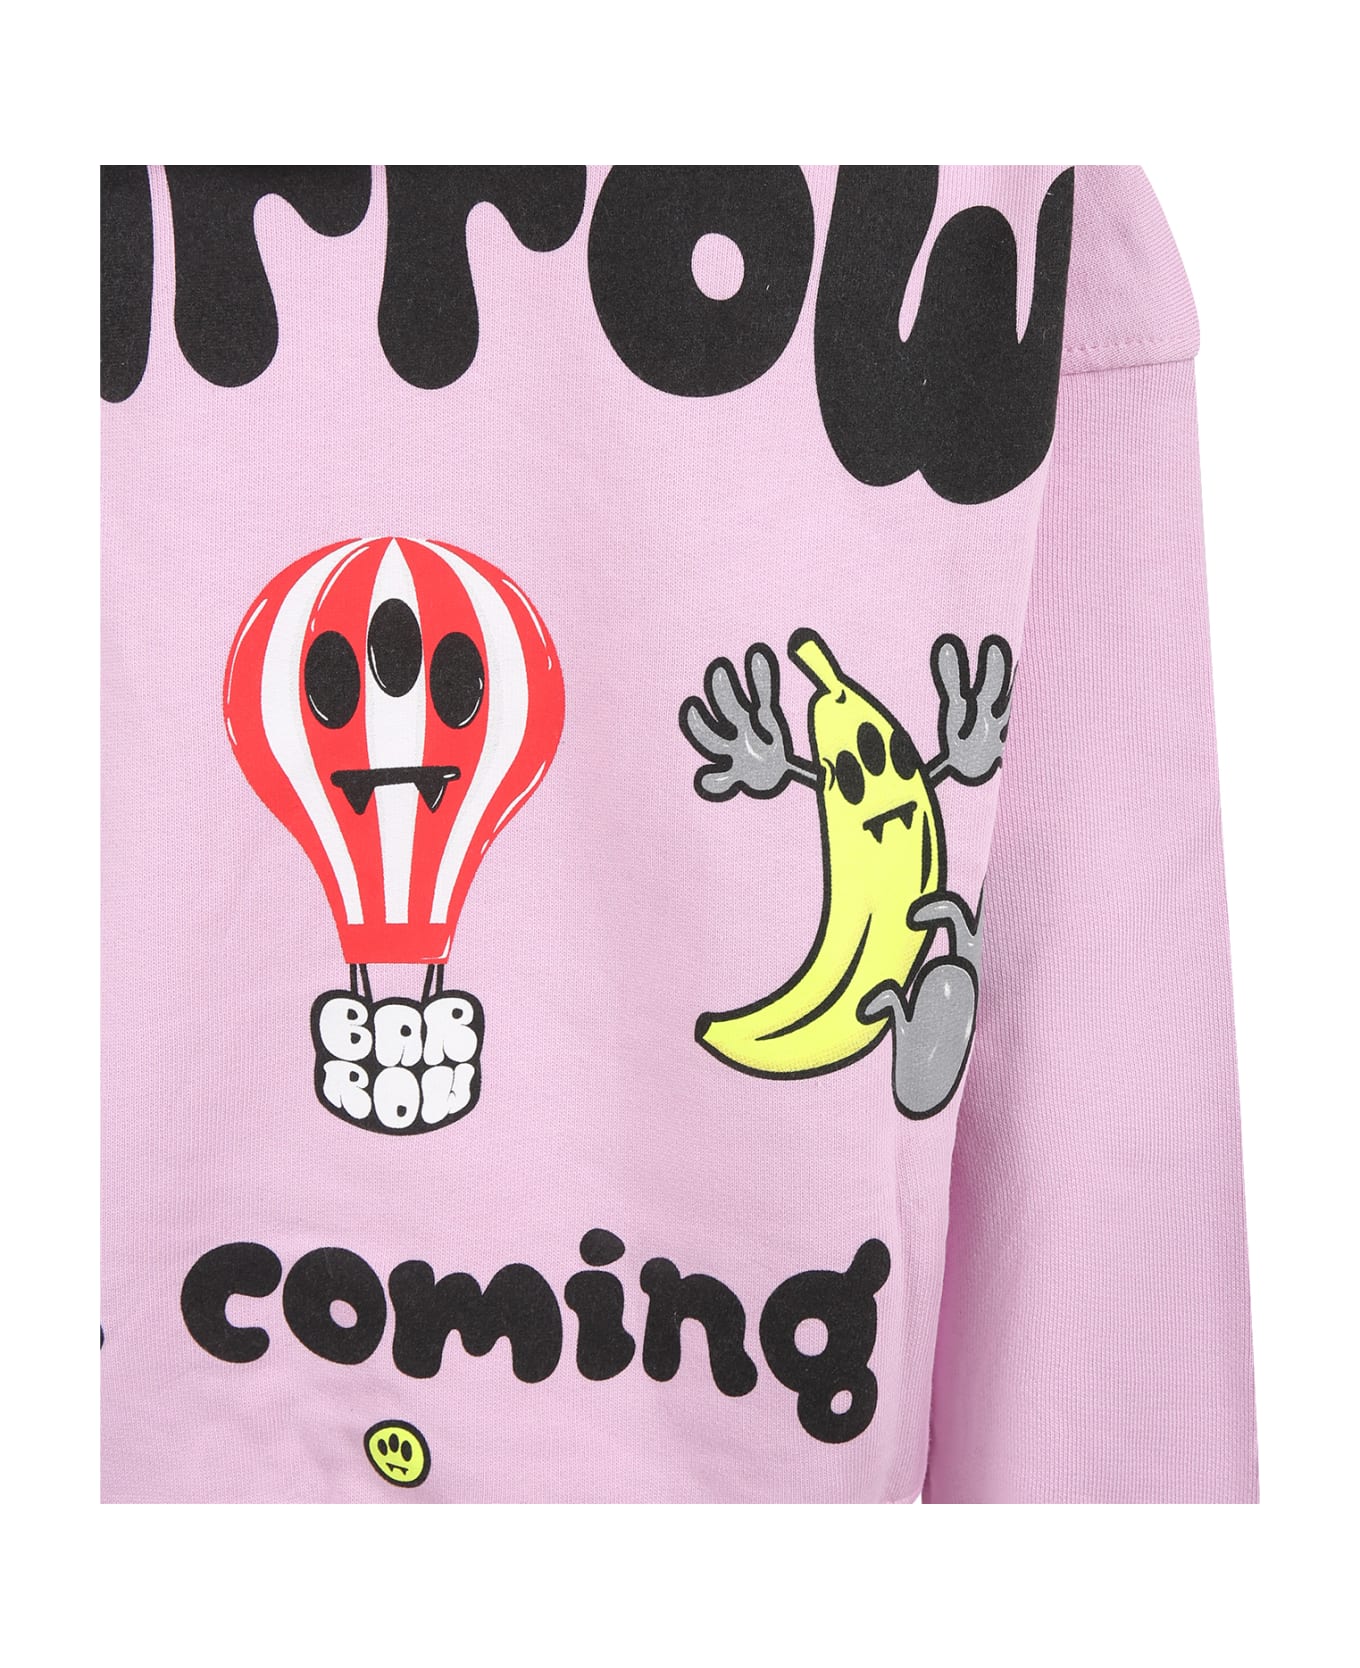 Barrow Pink Sweatshirt For Girls With Logo And Hot Air Balloon - Rosa